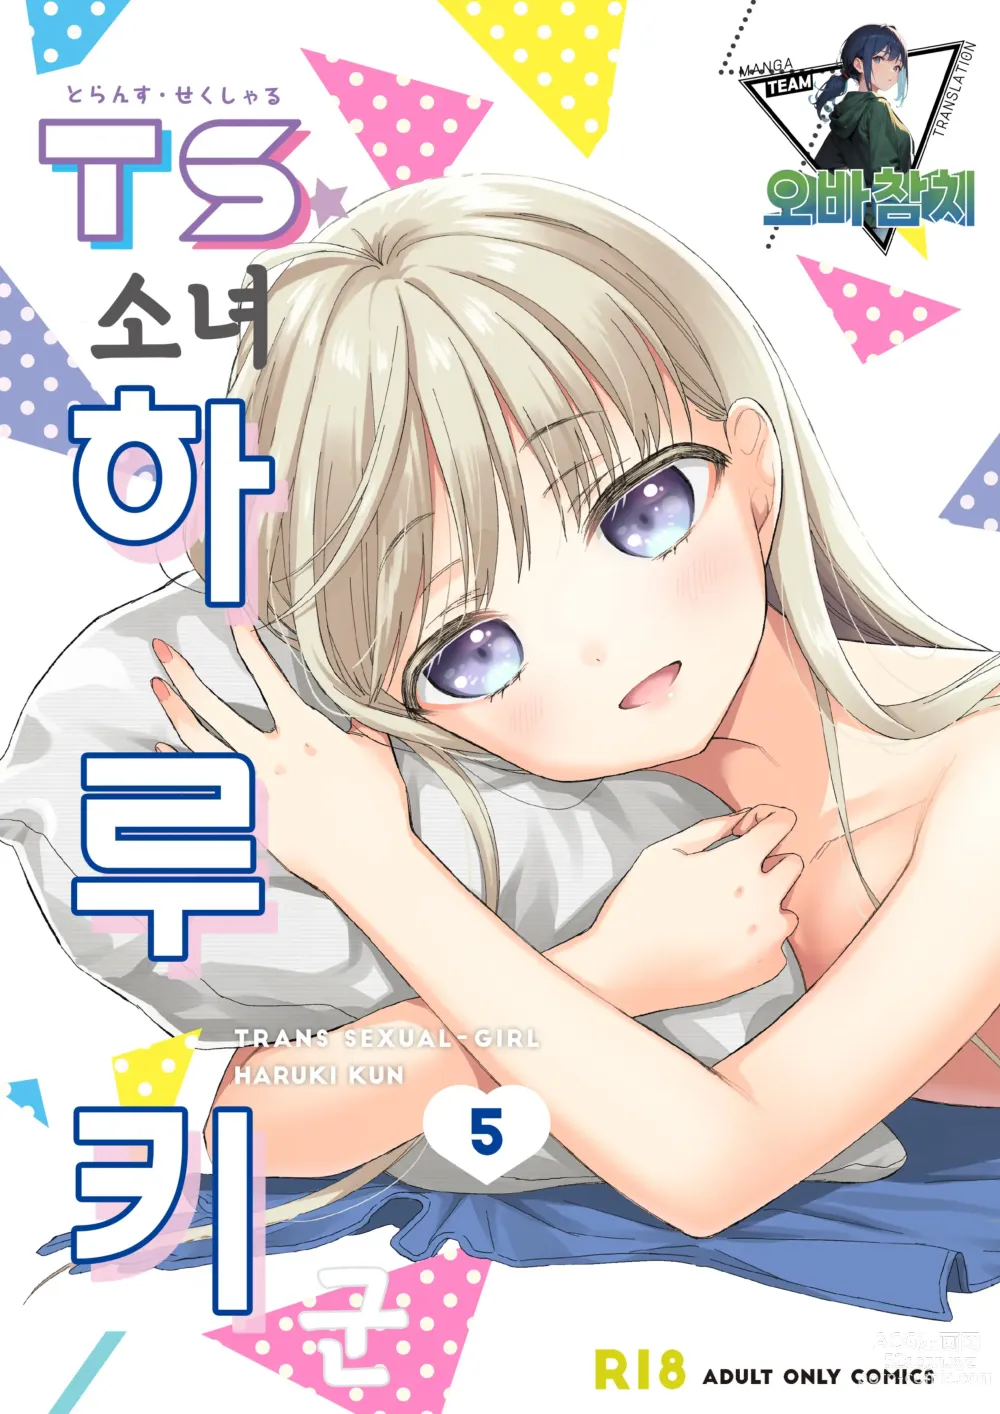 Page 1 of doujinshi TS소녀 하루키 군 5